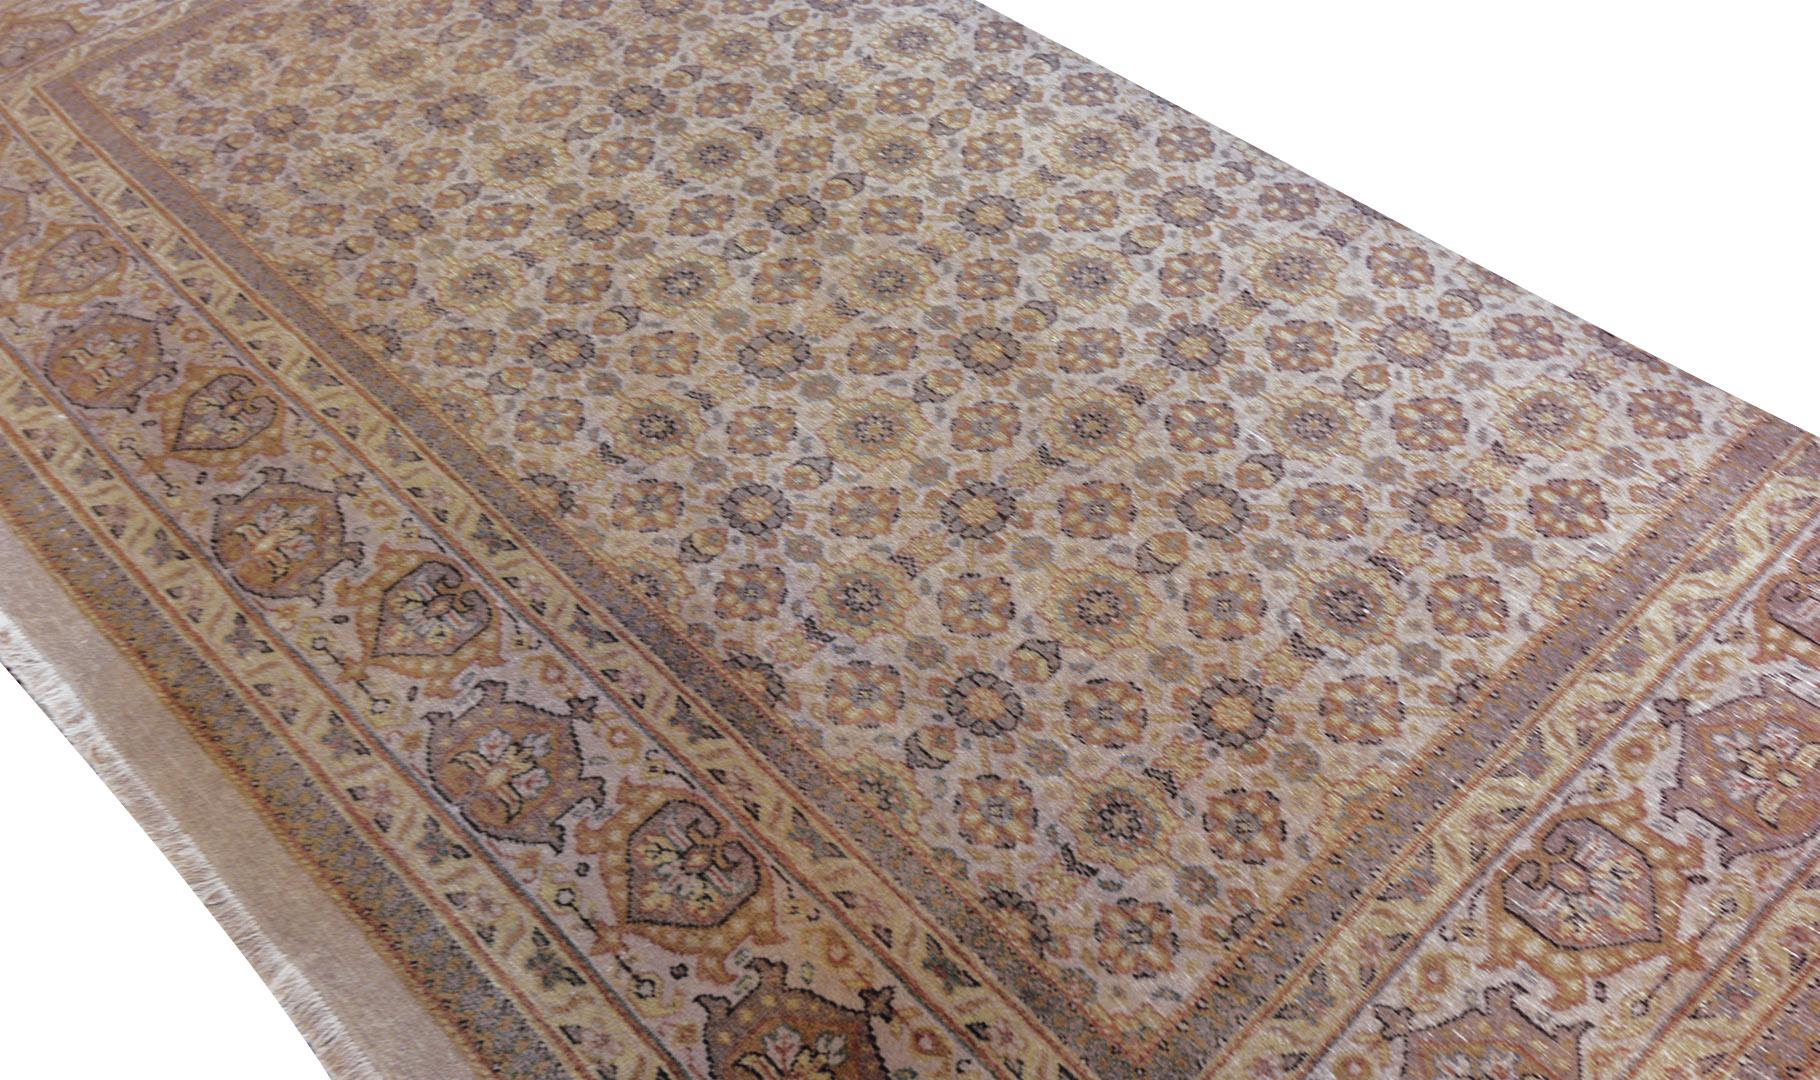 A beautiful Classic Tabriz from Kashmir featuring a masterful color combination and an extremely fine detailed workmanship. 100% natural wool pile. Brand new.